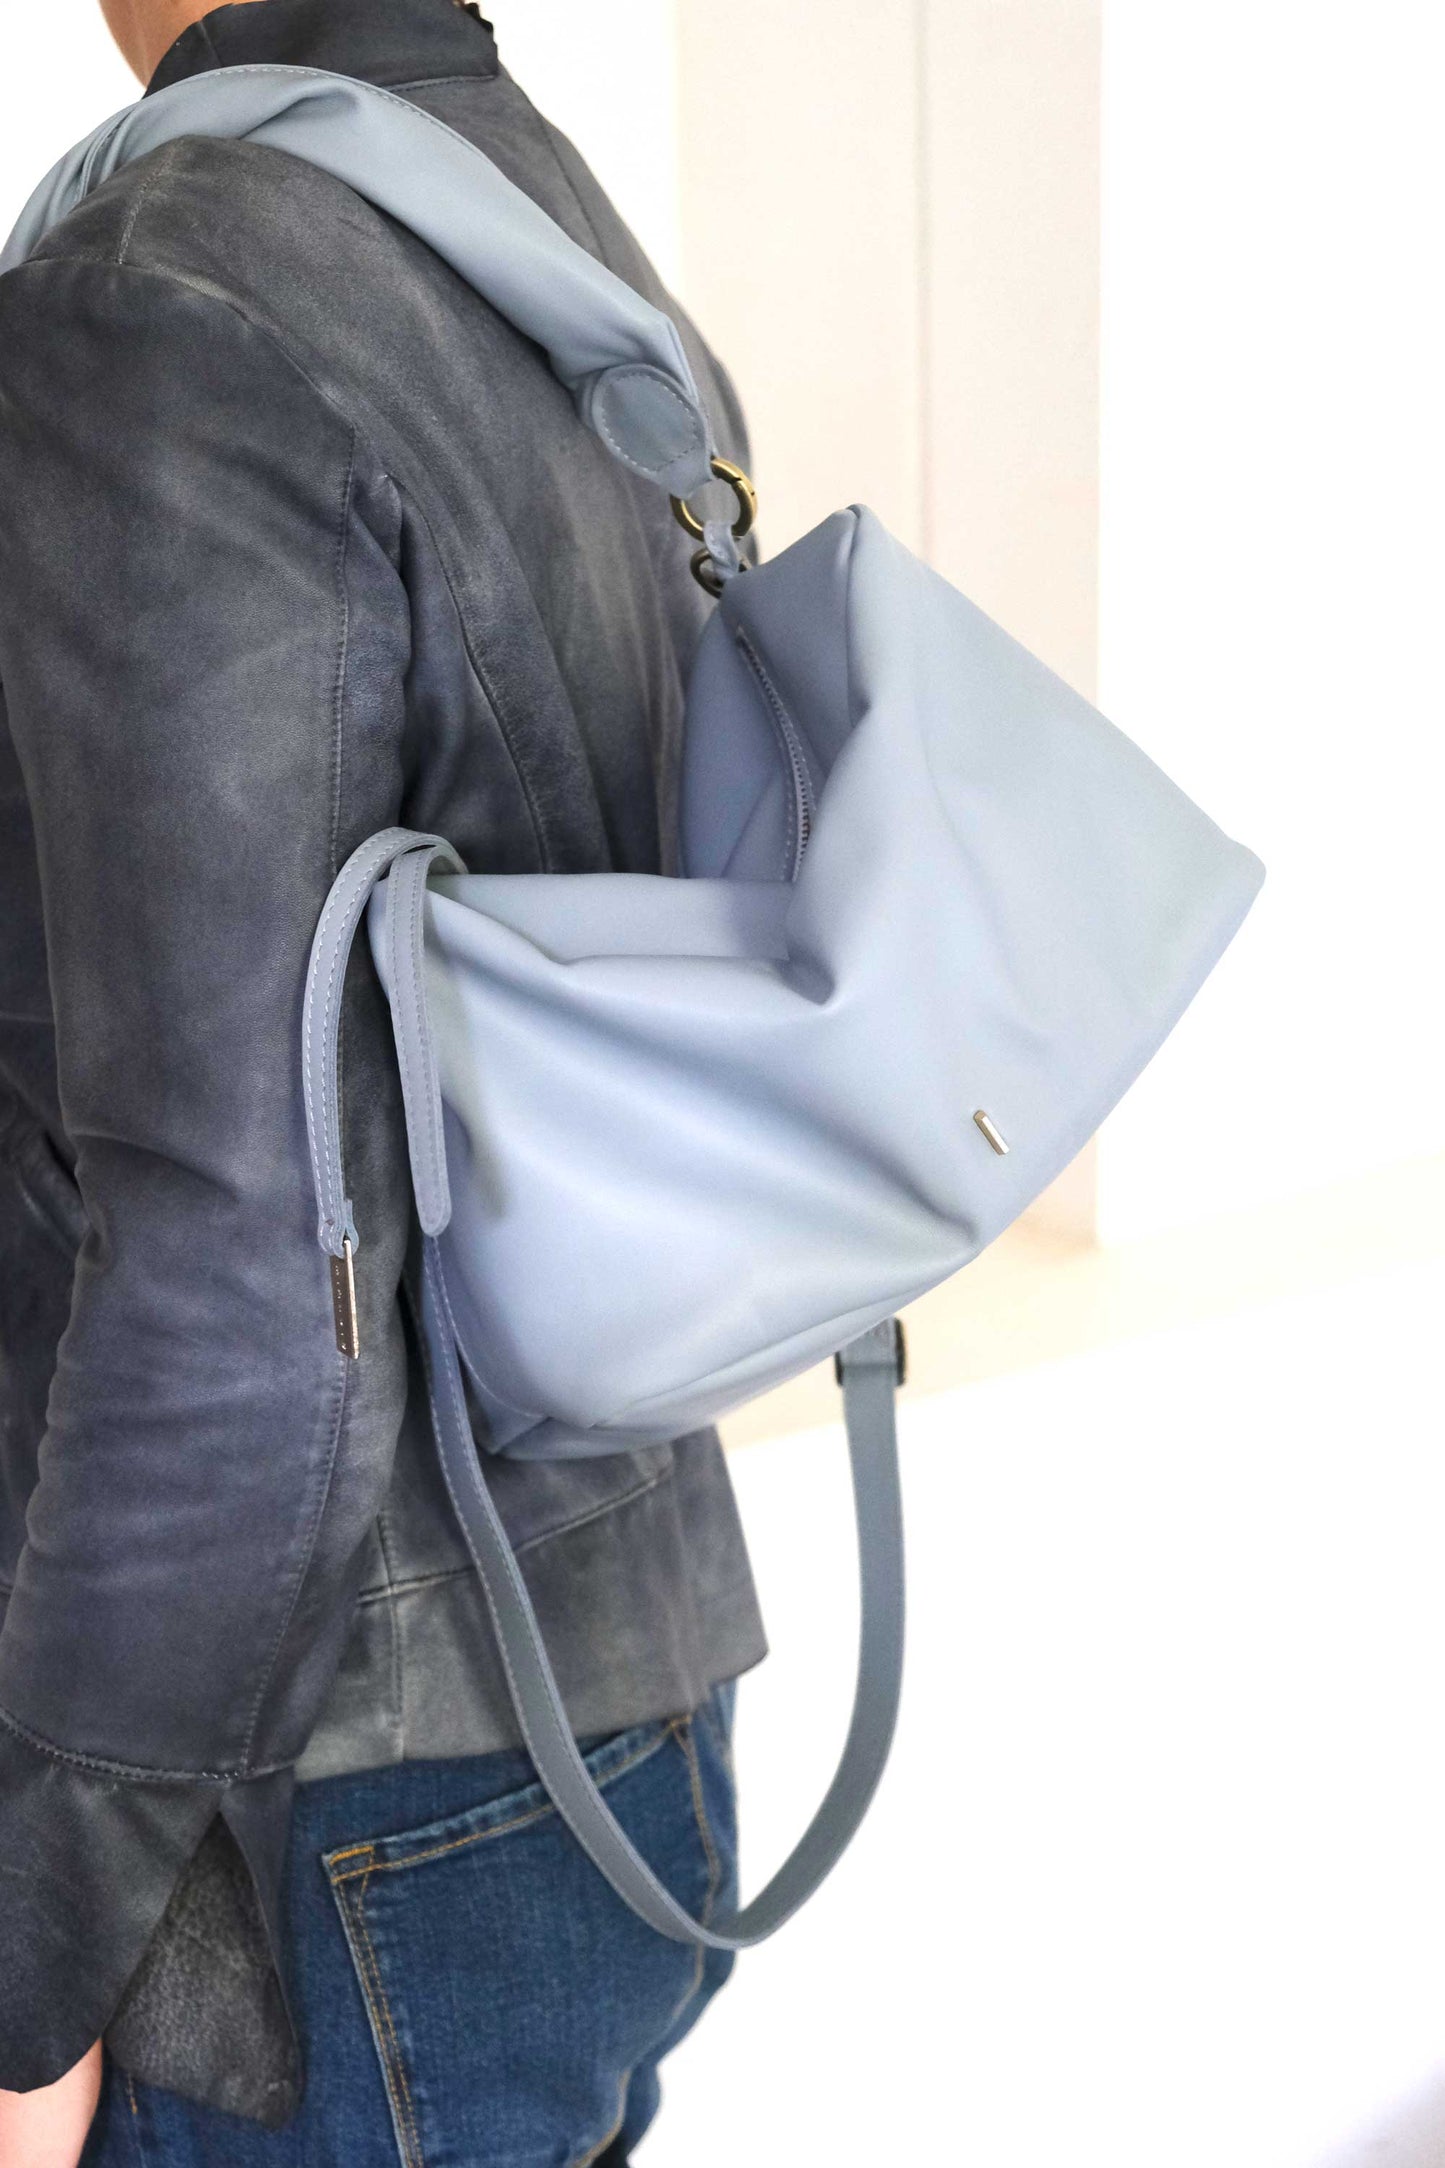 Bobo top handle bag in soft sky blue leather